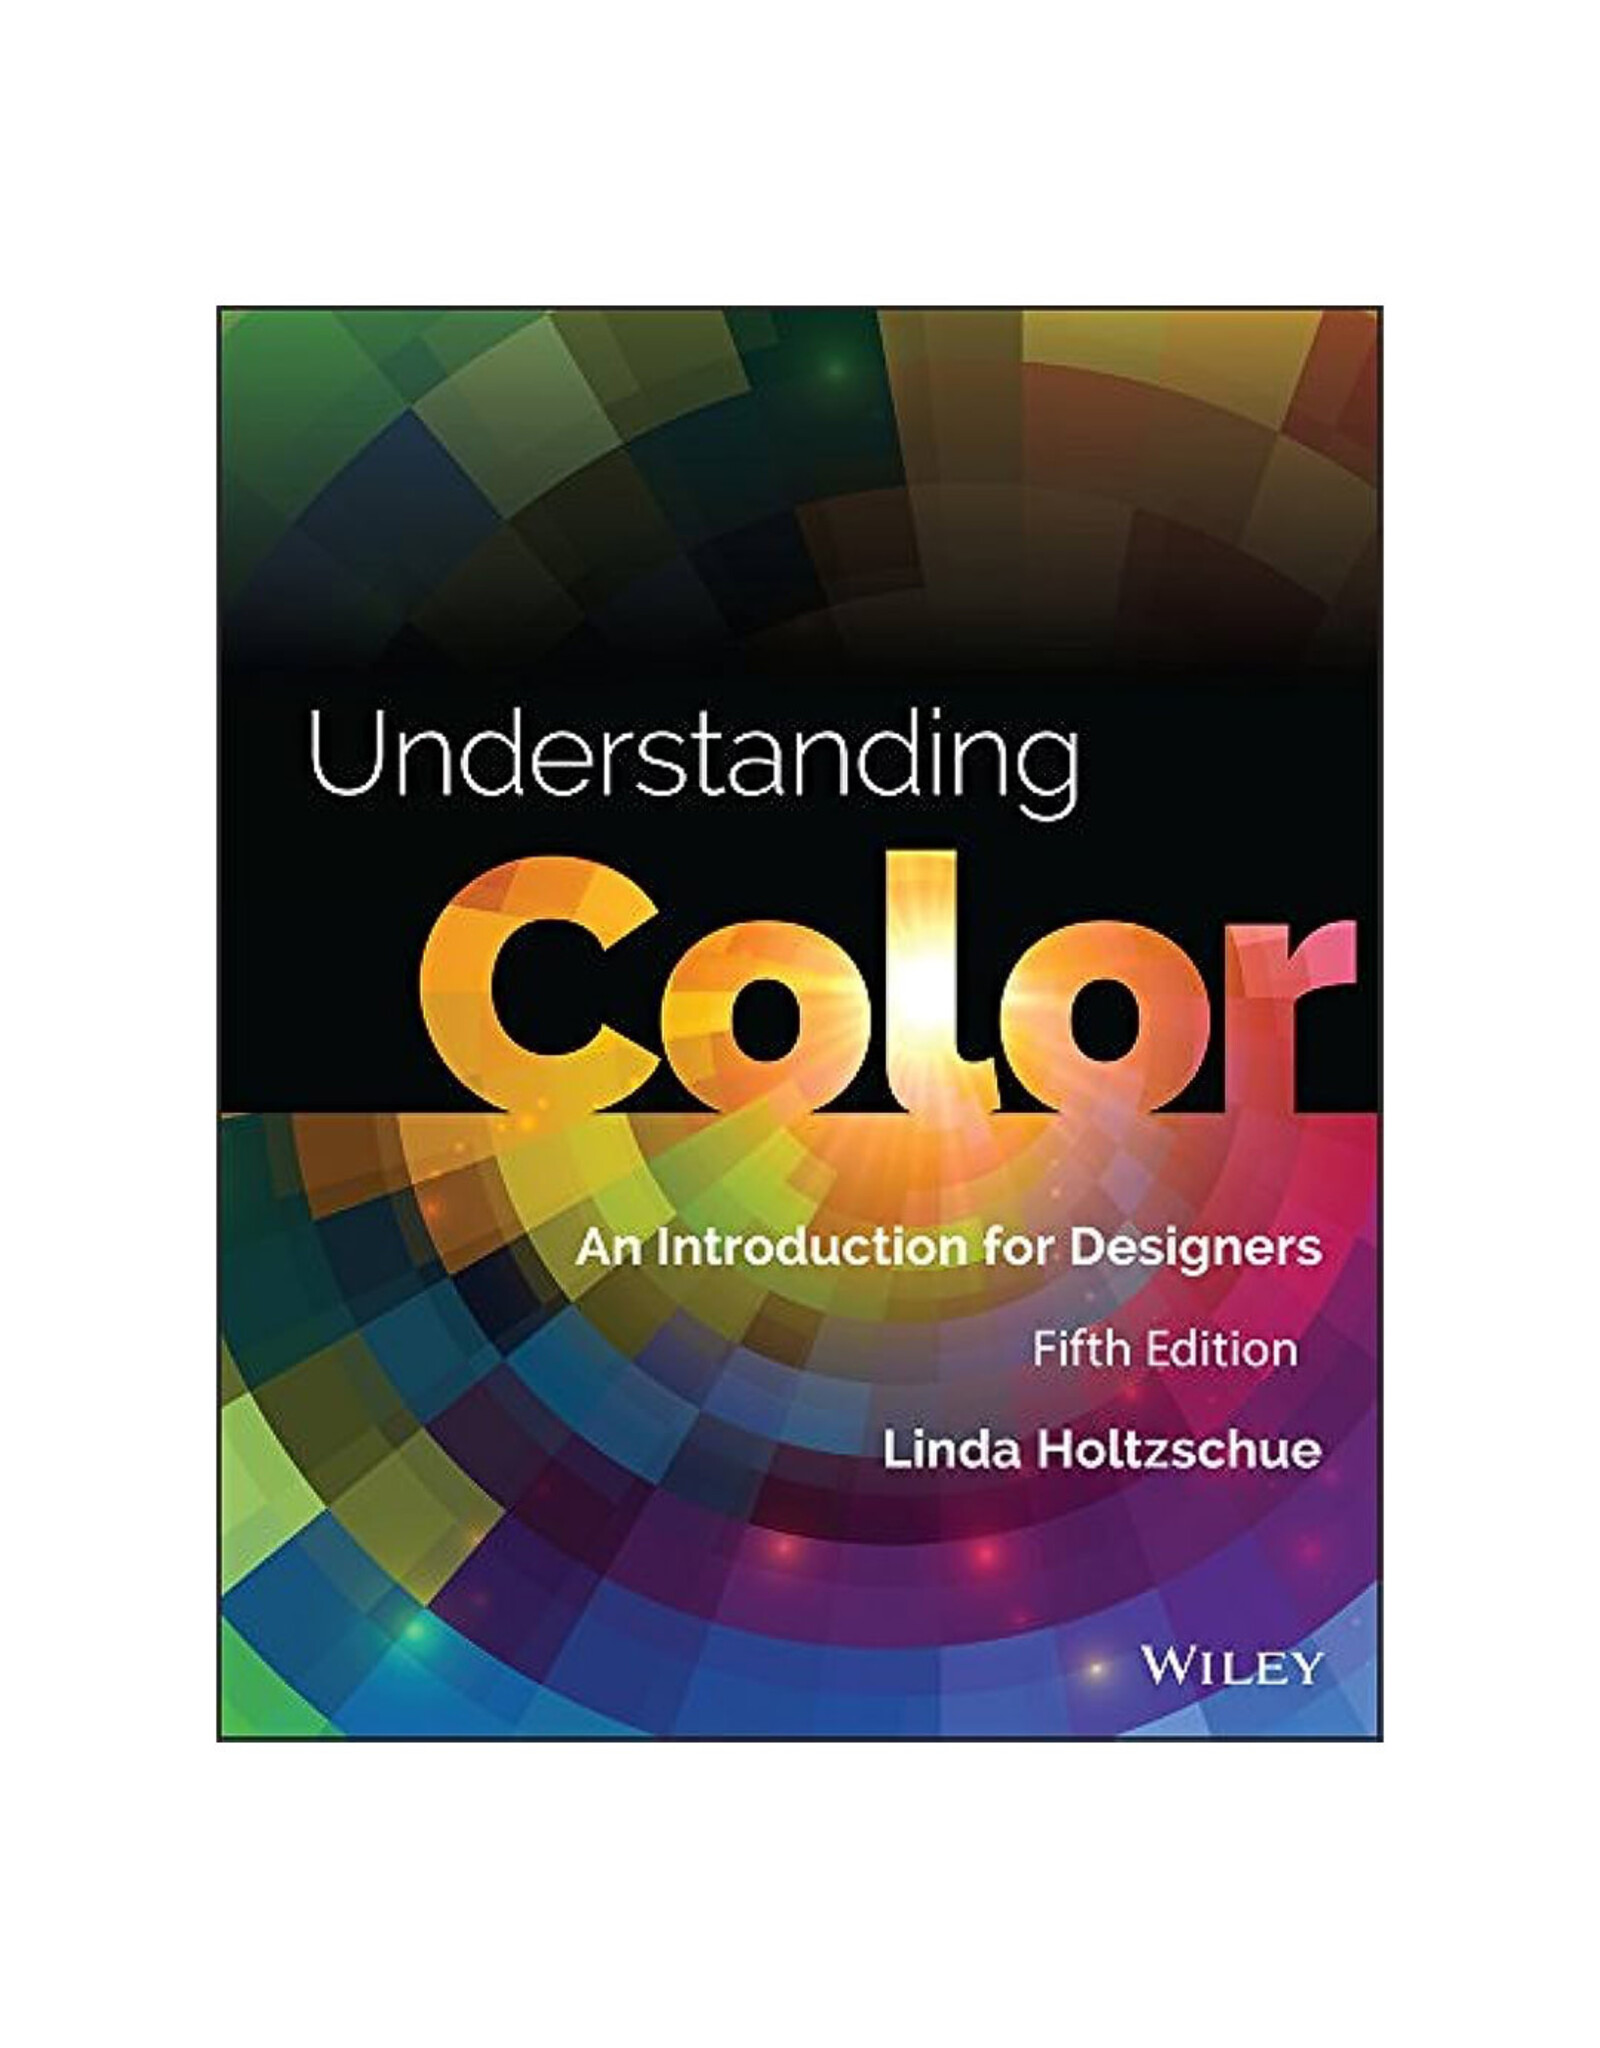 Understanding Color: An Introduction for Designers, 5th edition